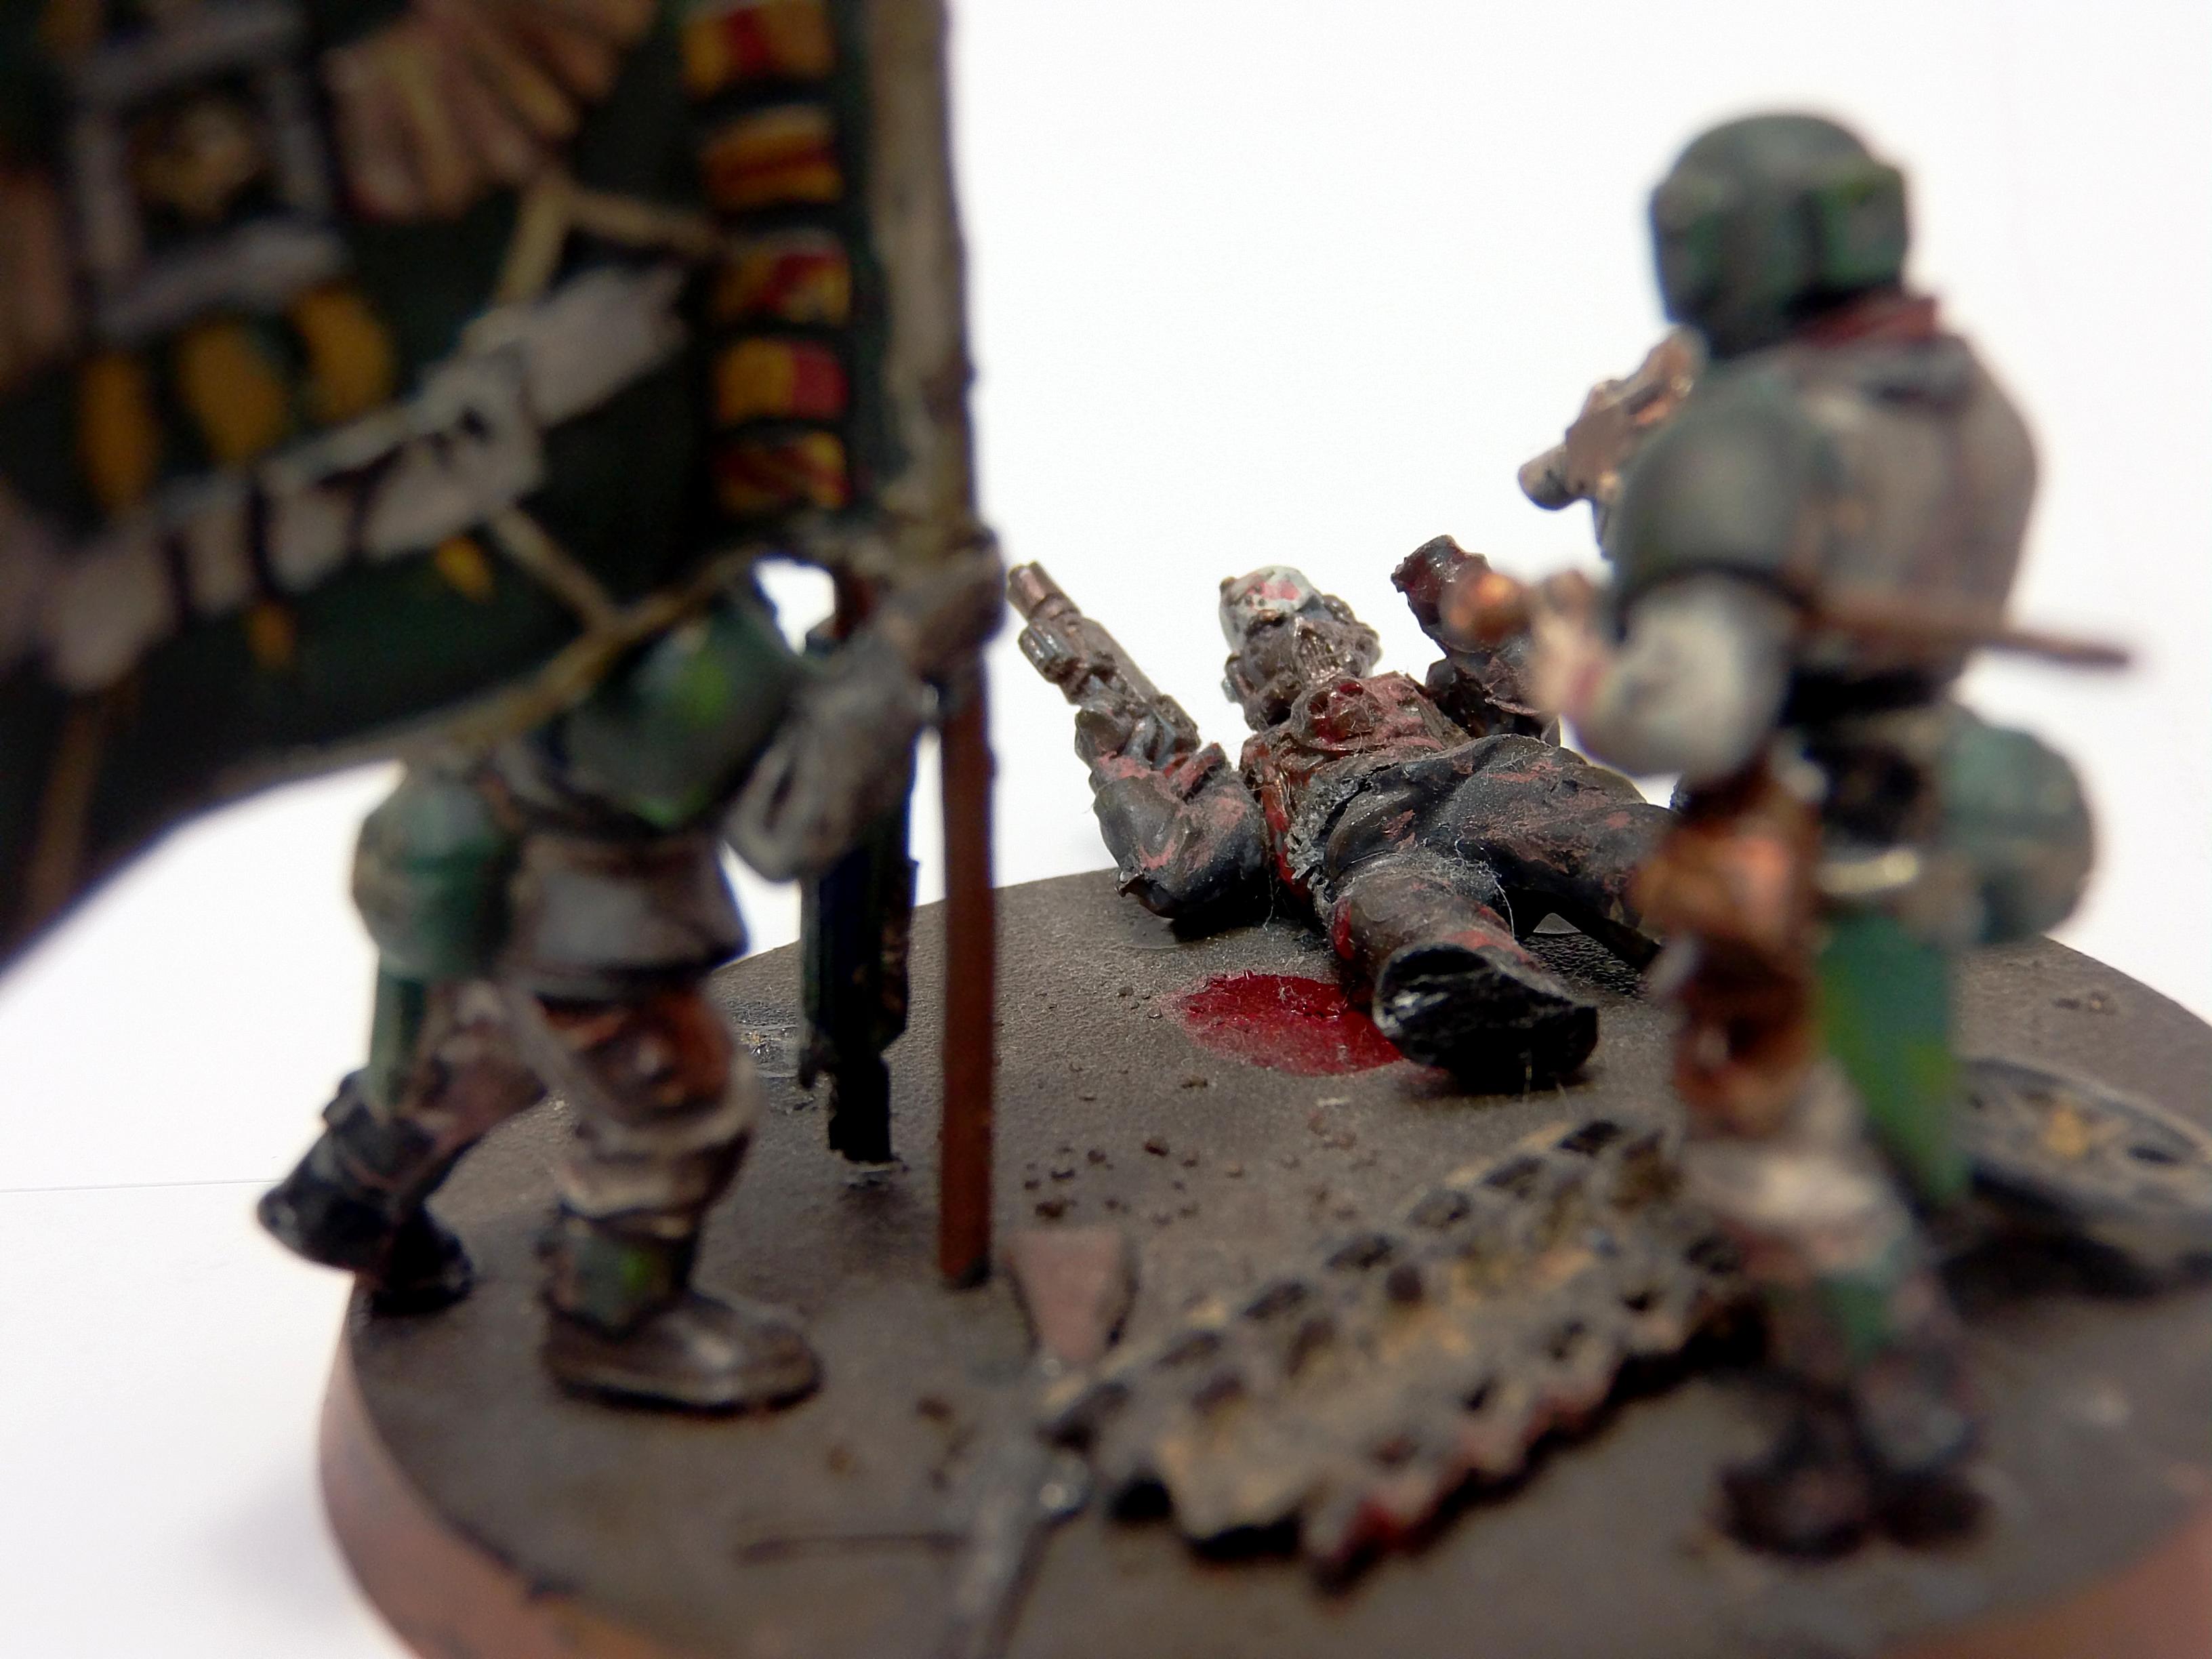 Astra Militarium, Chaos, Diorama, Execution, Imperial Guard, Objective Marker, Warhammer 40,000